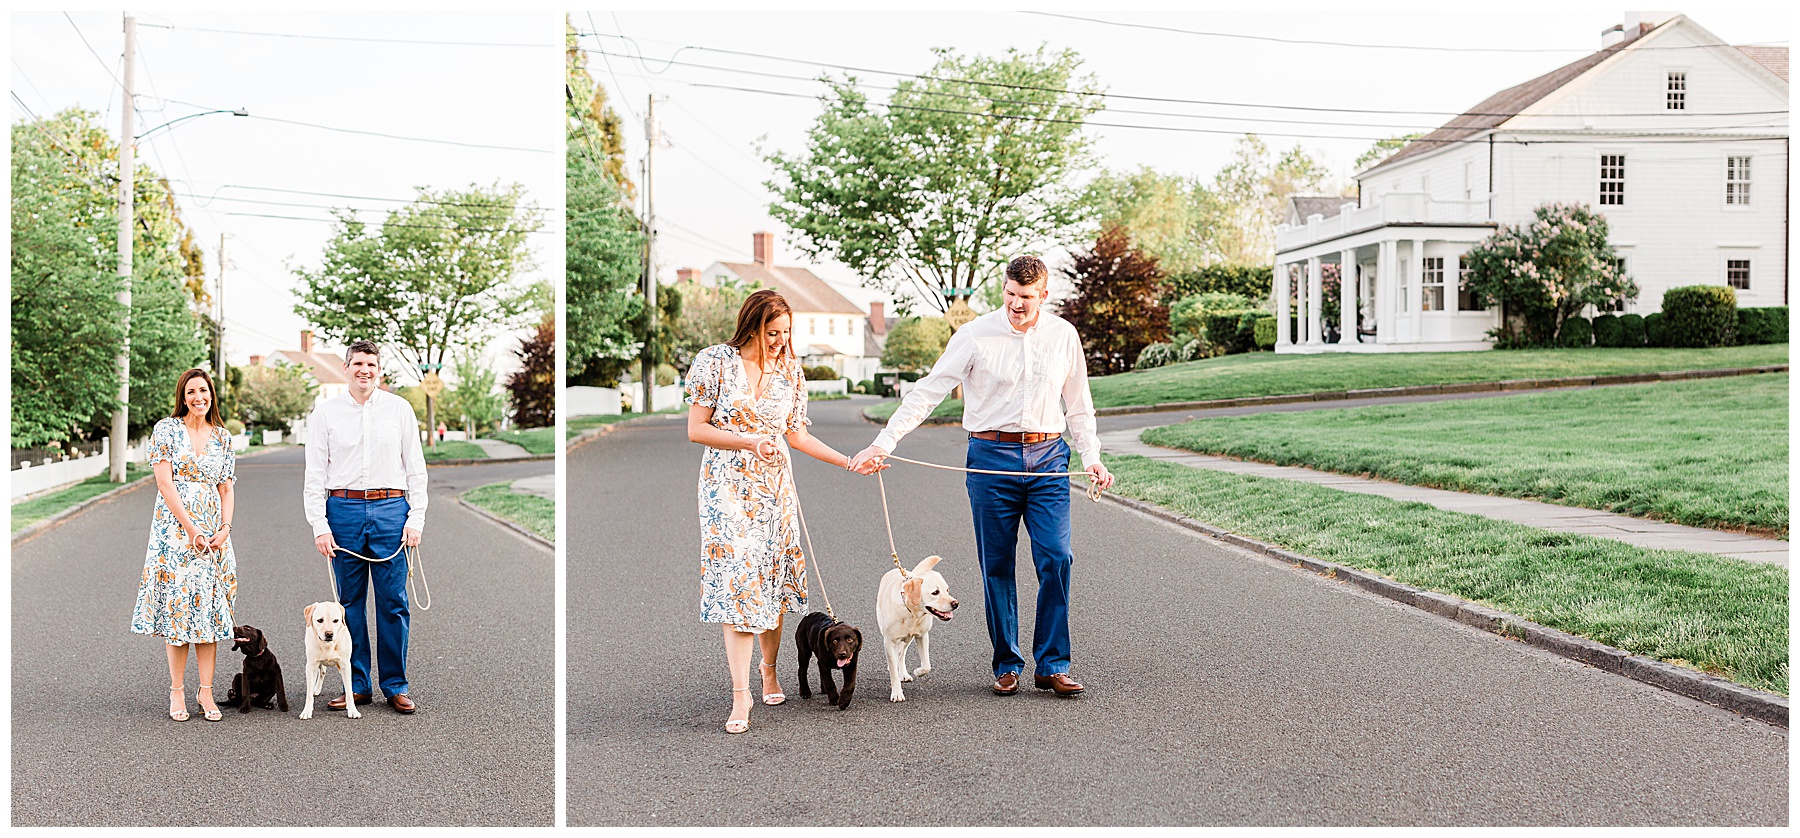 Bride-and-groom-walking-dogs-during-engagement-session